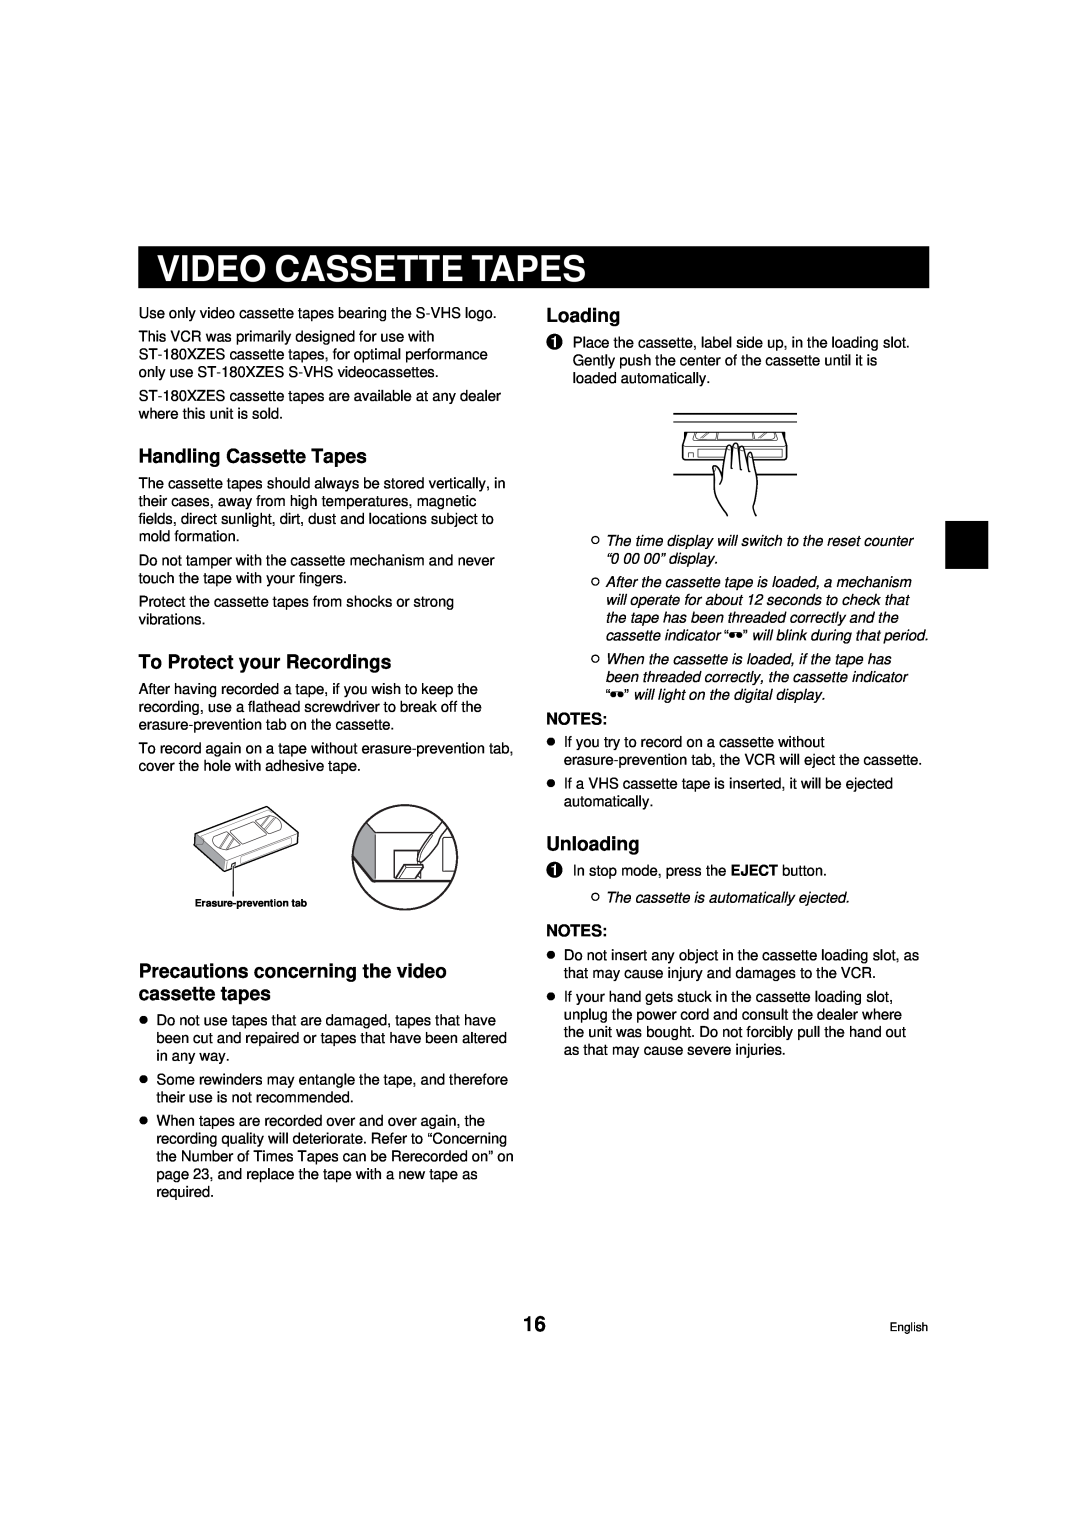 Sanyo RD2QD/NA, DTL-4800 Video Cassette Tapes, Loading, Handling Cassette Tapes, To Protect your Recordings, Unloading 